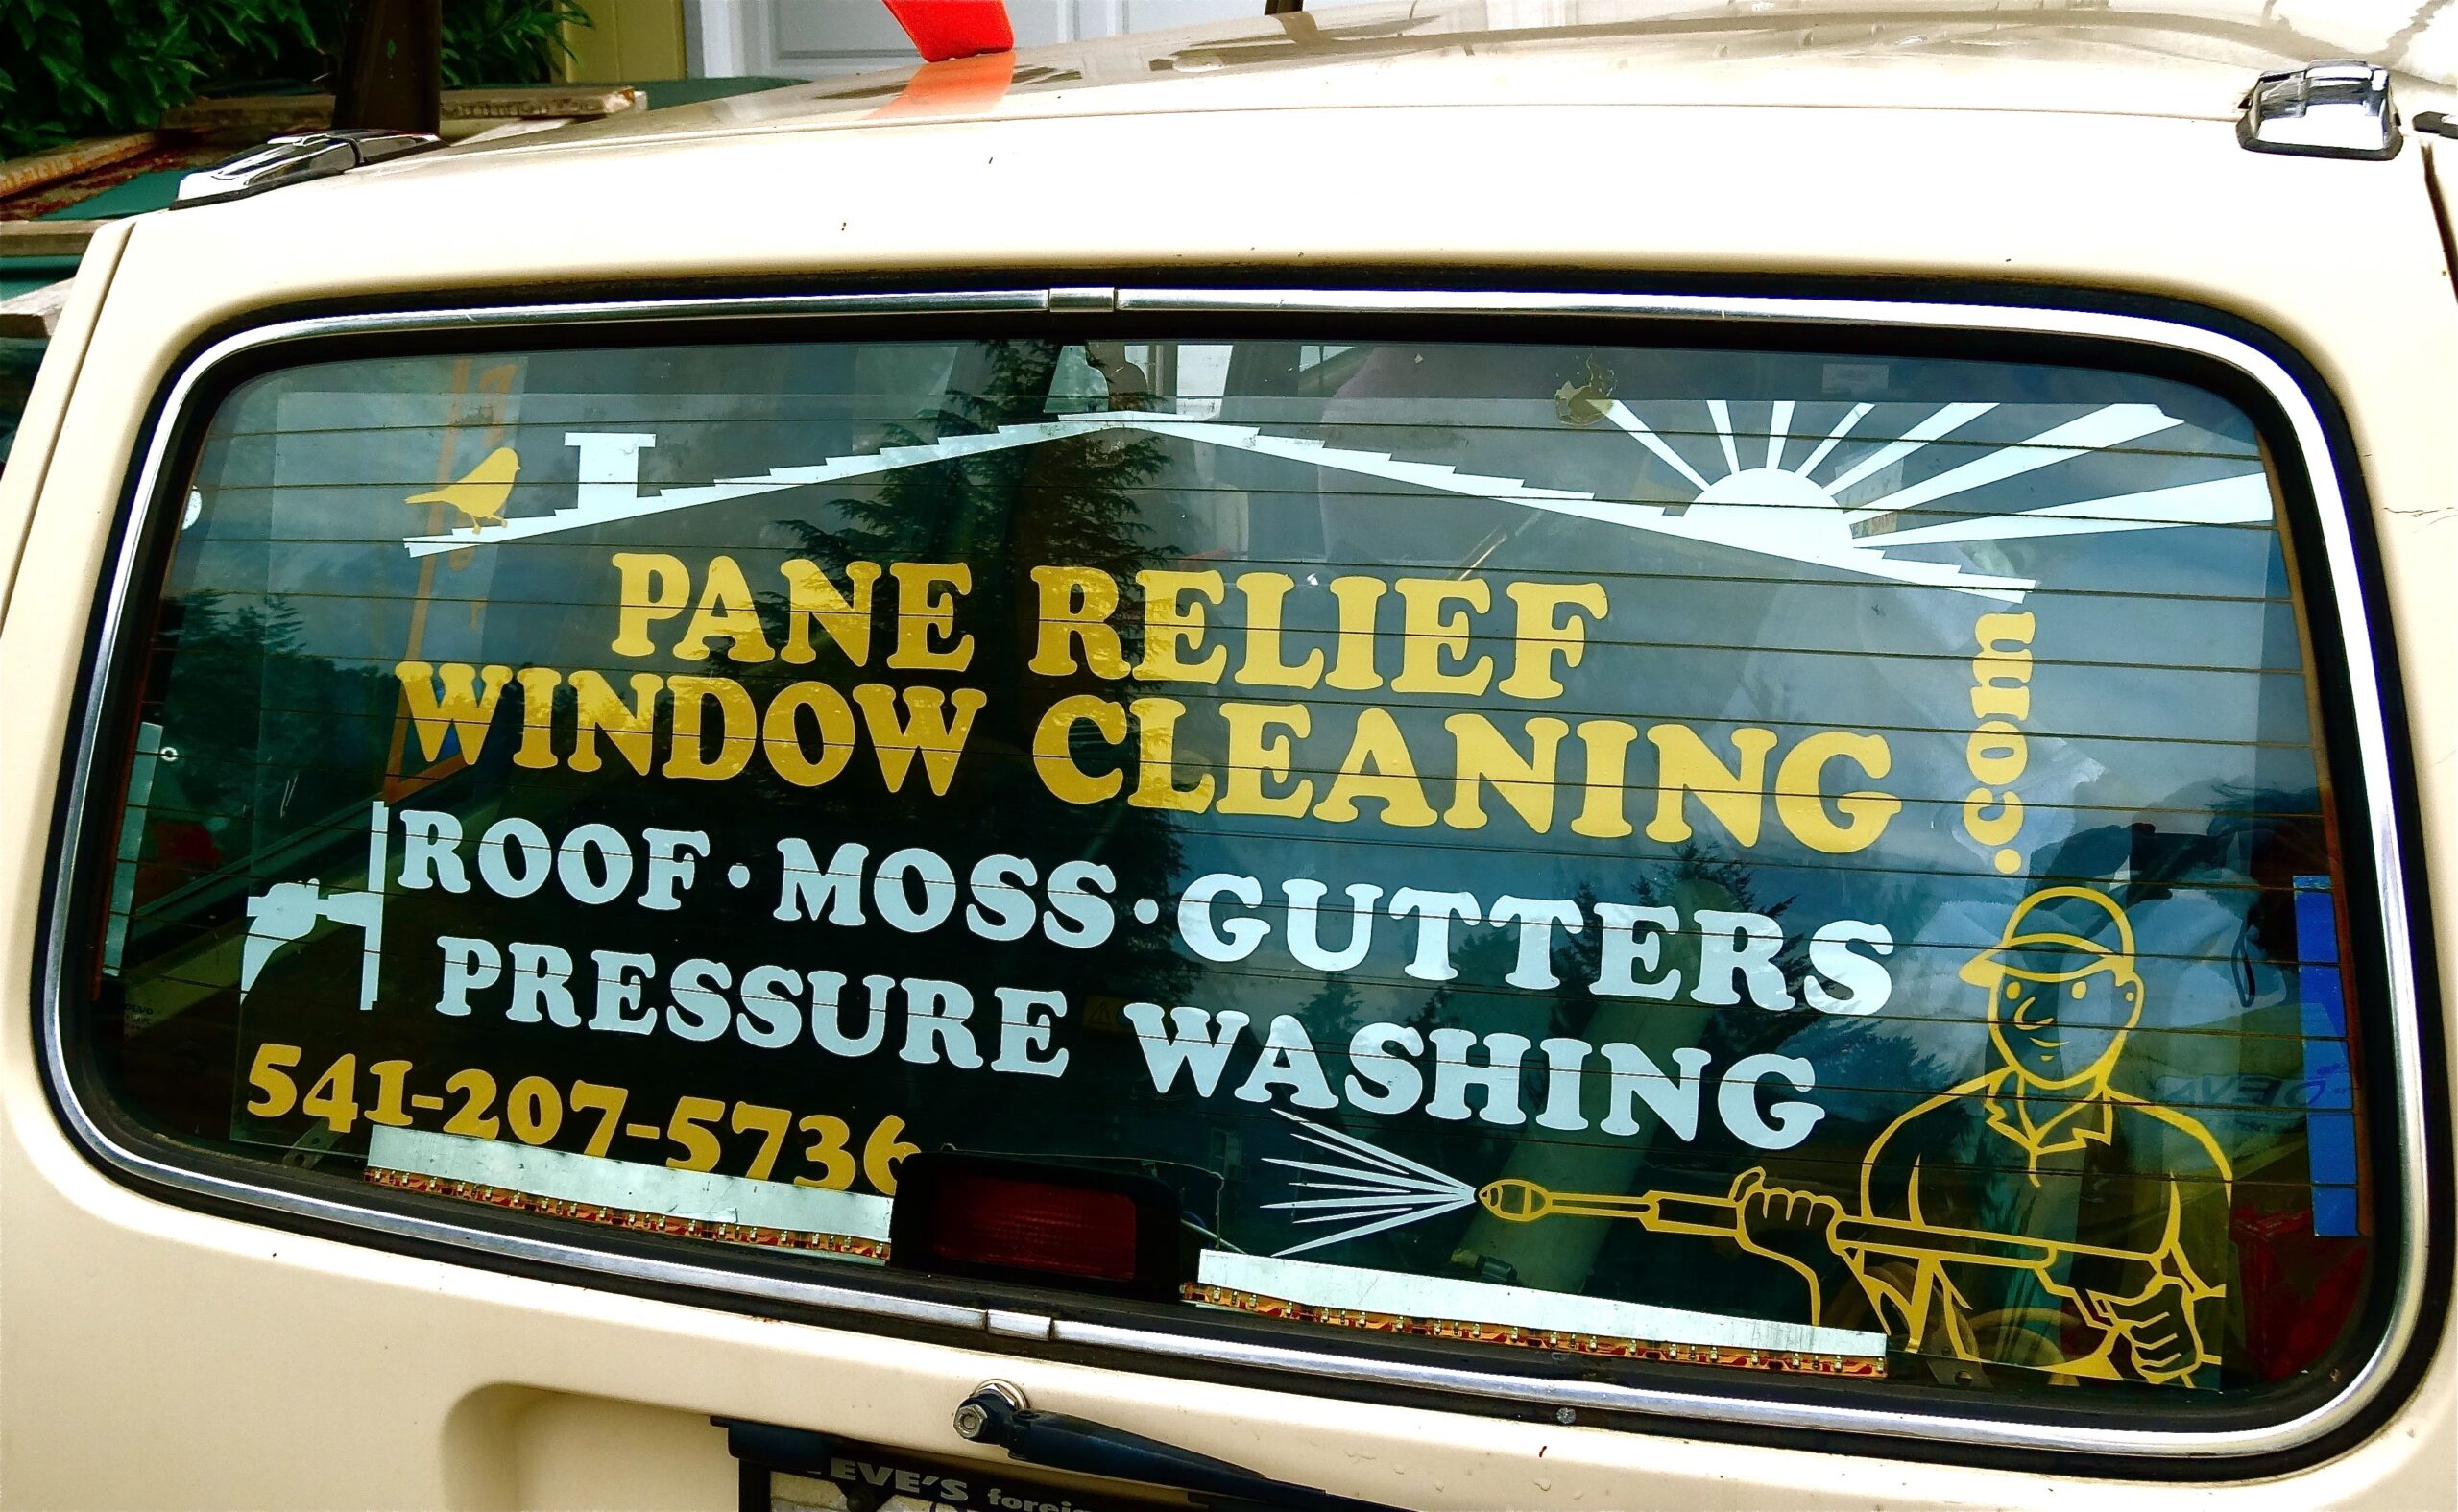 Ken Vandehey specializes in window cleaning for both businesses and residences in Corvallis and Philomath.